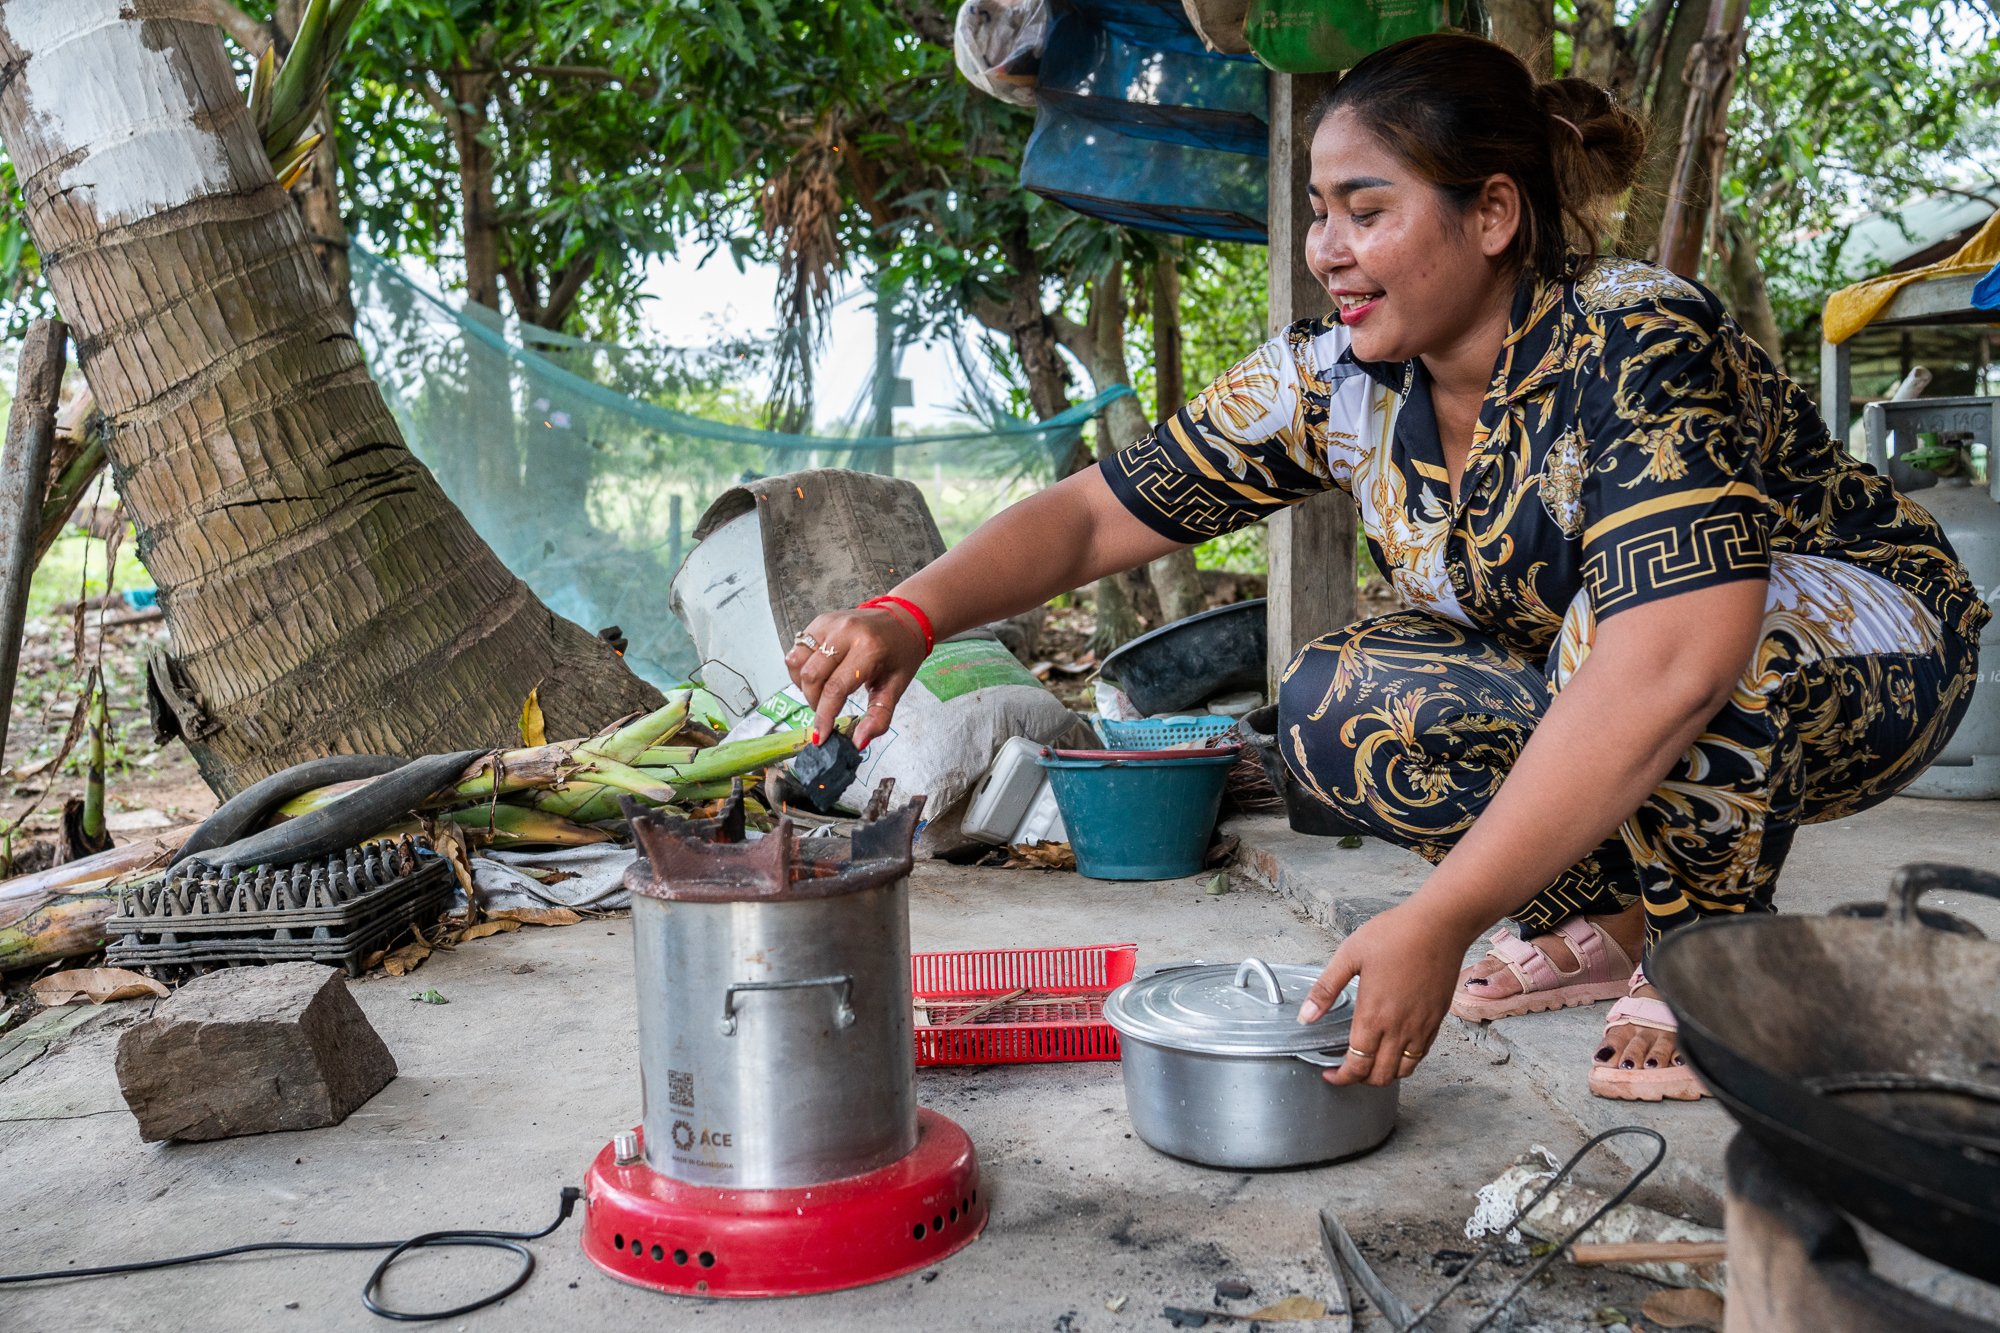 Leam Salao puts wood on her stove bought using a loan from NGO Kiva, Siem Reap, Cambodia 